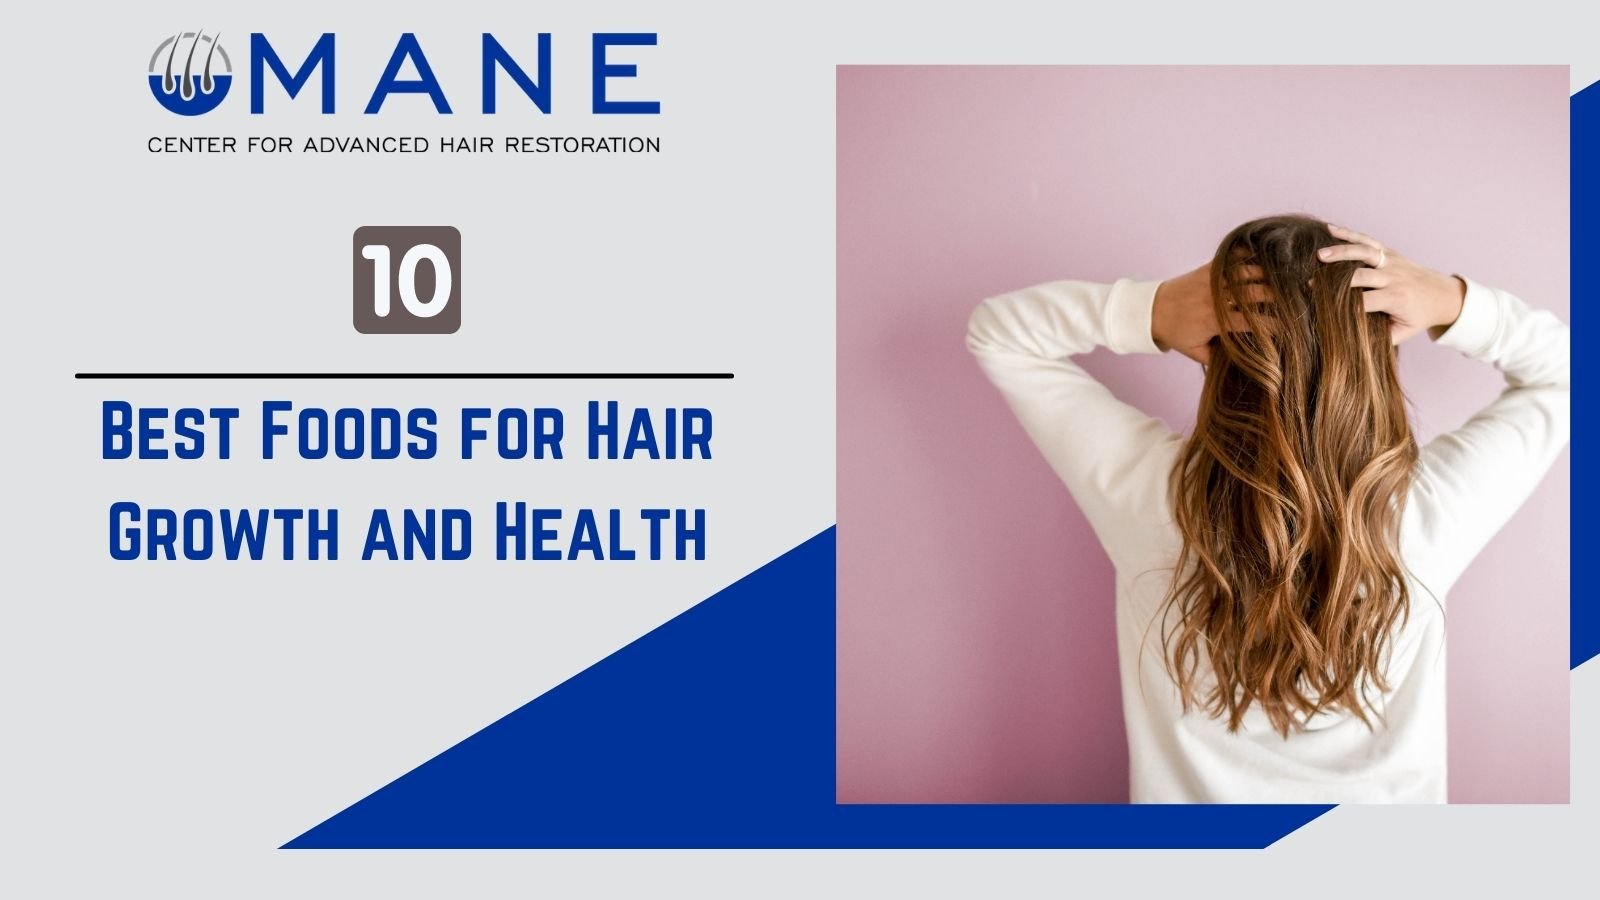 10 Best Foods for Hair Growth and Health